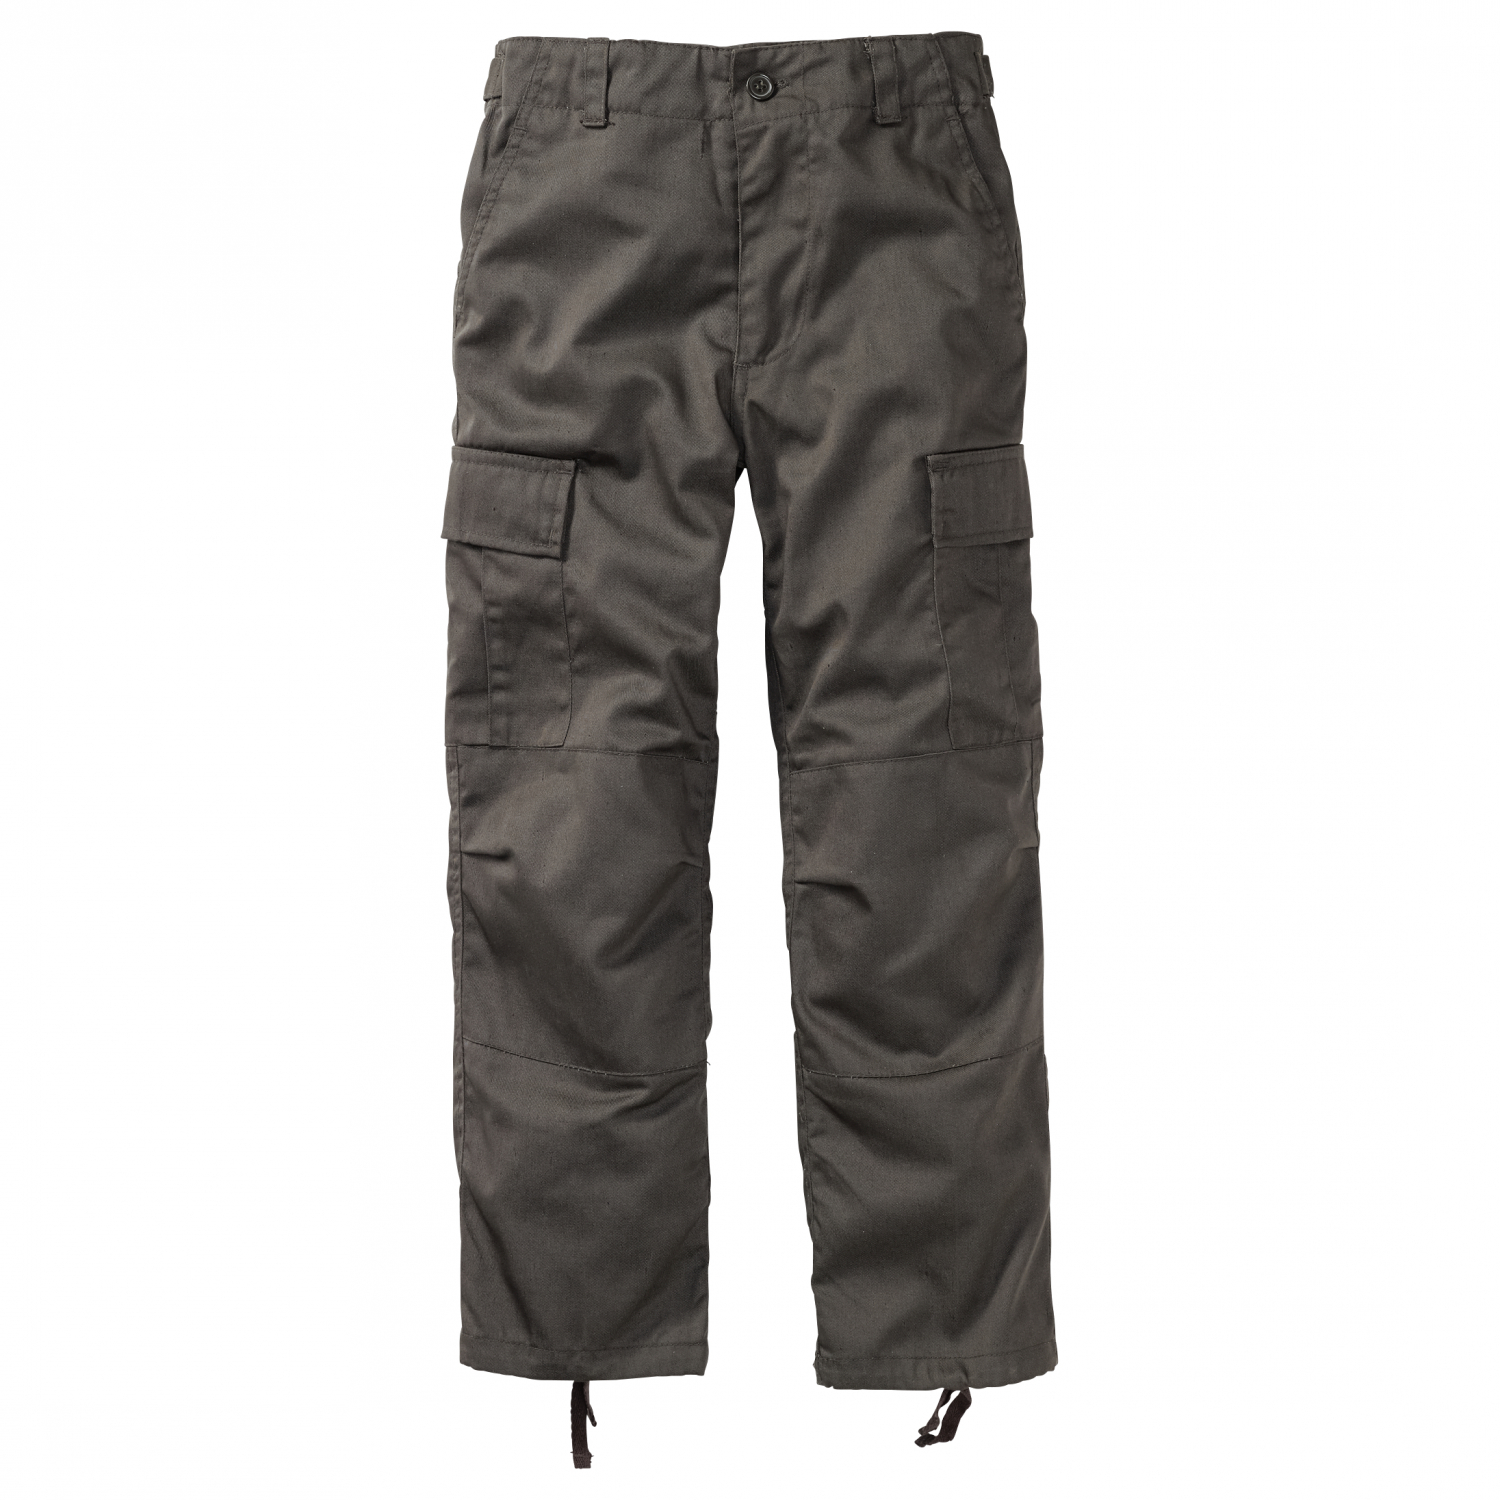 Percussion Kinder Outdoorhose BDU 